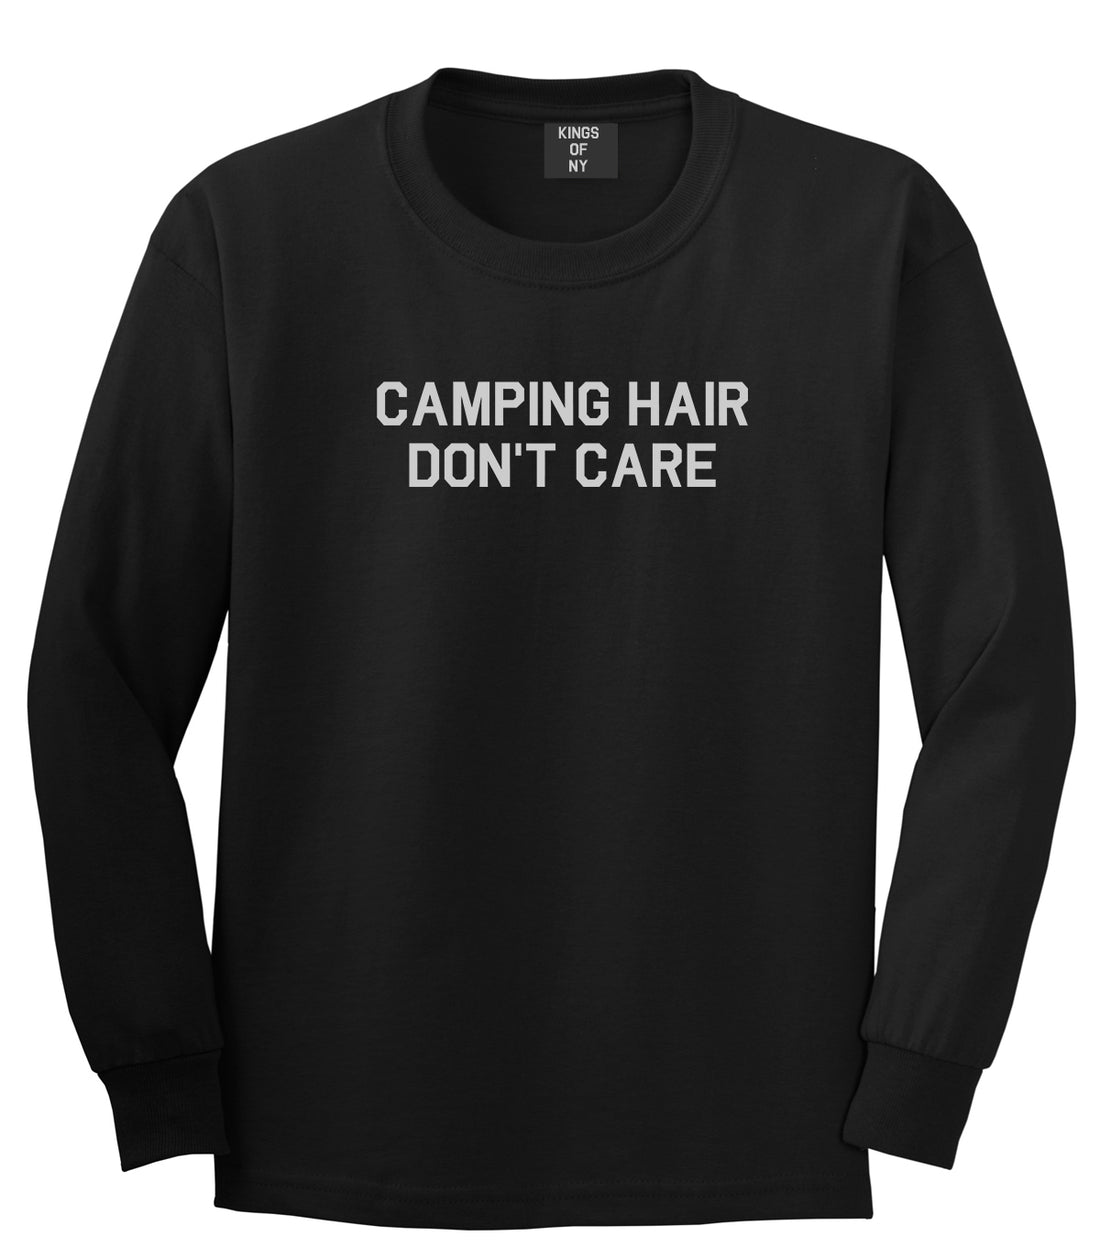 Camping Hair Dont Care Black Long Sleeve T-Shirt by Kings Of NY